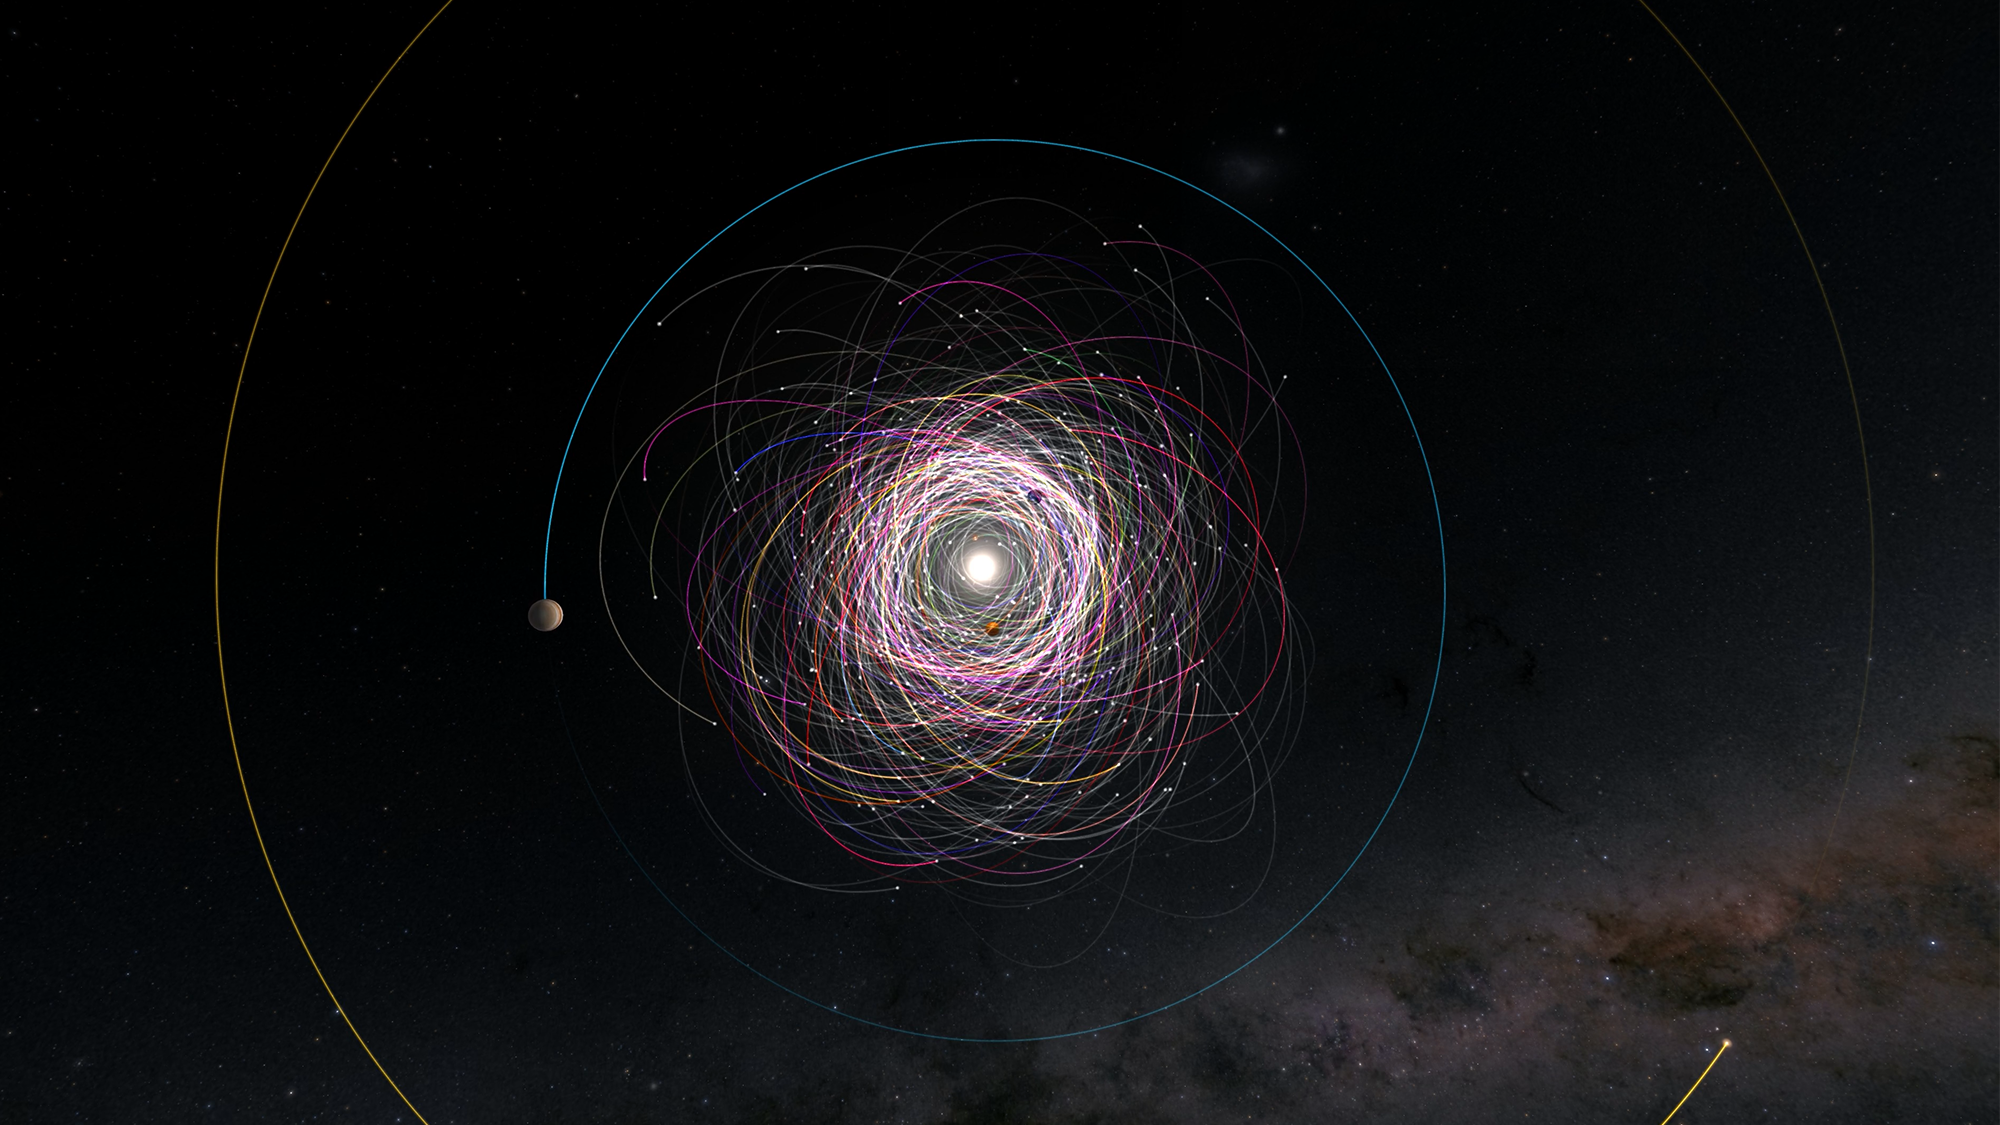 A mission to map the universe unveils star clusters, asteroids, and tricks of gravity